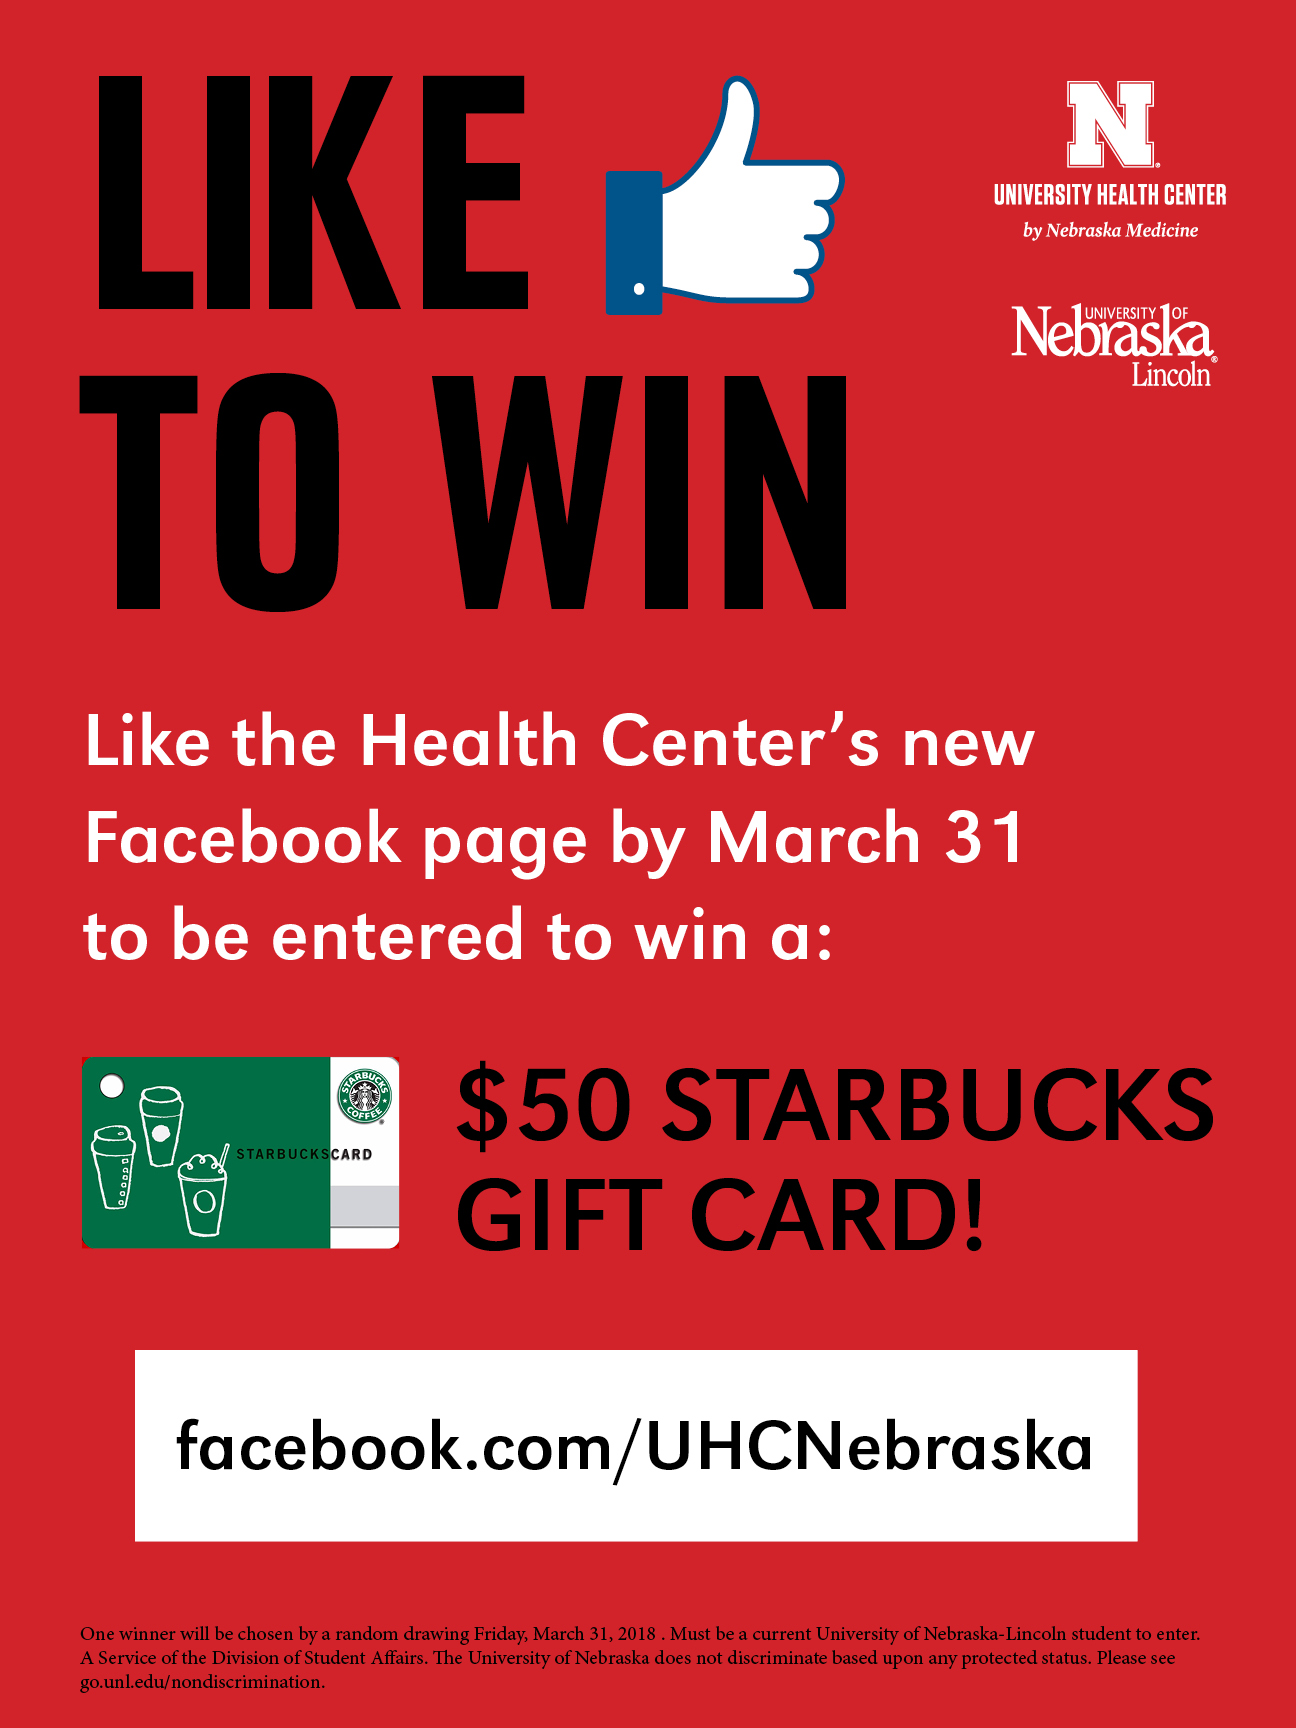 Only current University of Nebraska-Lincoln students are eligible to be entered to win.